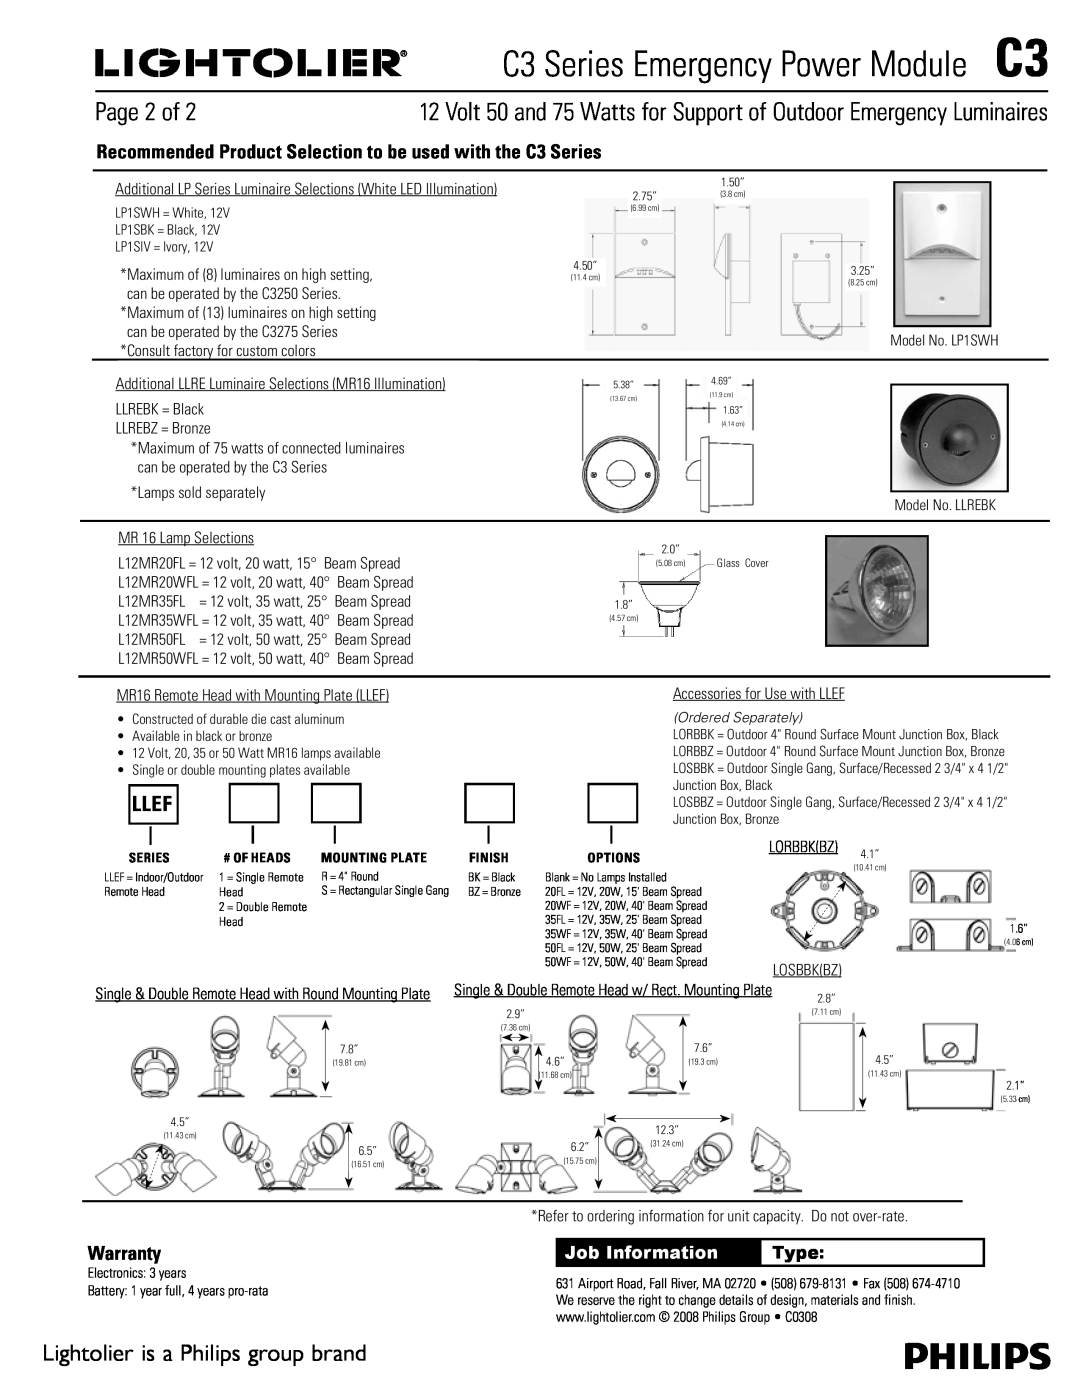 Lightolier C3 Series Page 2 of, Llef, Warranty, C3 Series Emergency Power ModuleC3, Lightolier is a Philips group brand 